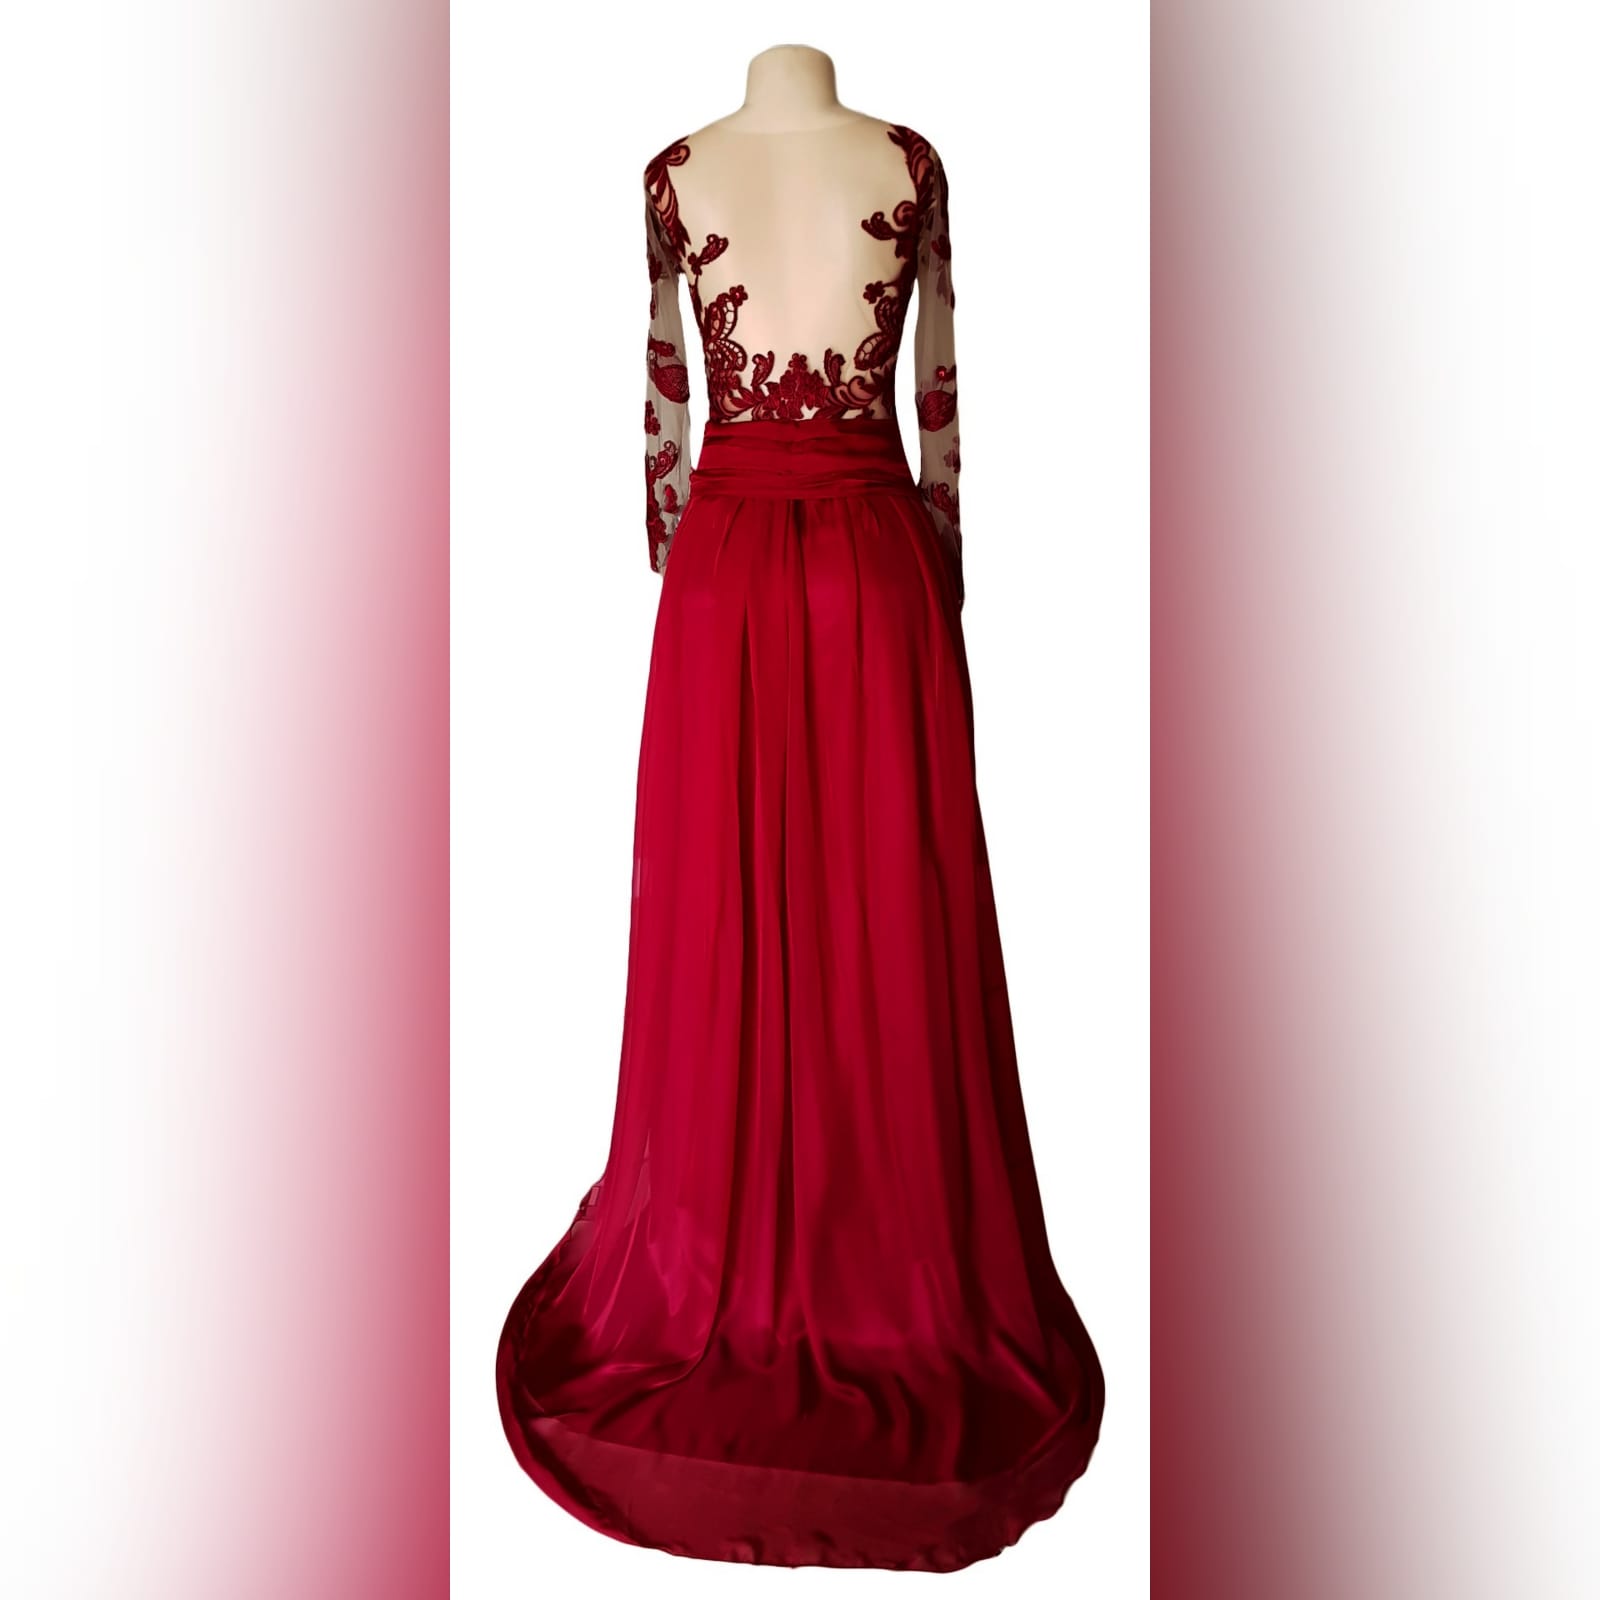 Red lace and chiffon prom dress 4 red lace and chiffon prom dress with an illusion lace bodice, illusion open back and sleeves detailed with lace and beads. A gathered chiffon bottom with a ruched belt a sheer slit and a train.